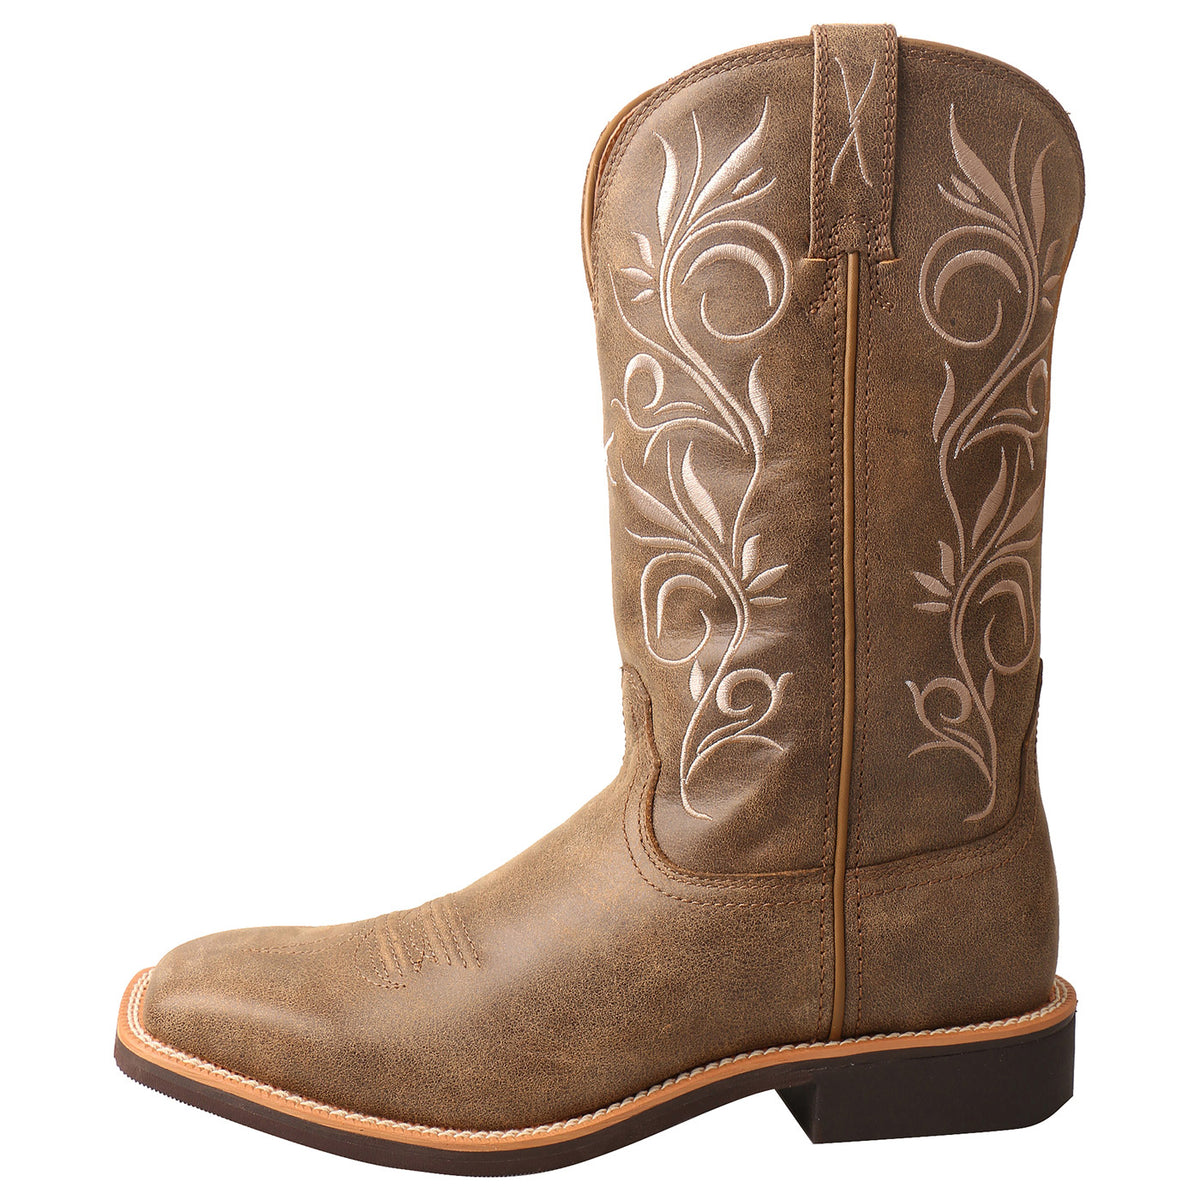 Twisted X Women's Top Hand Boot